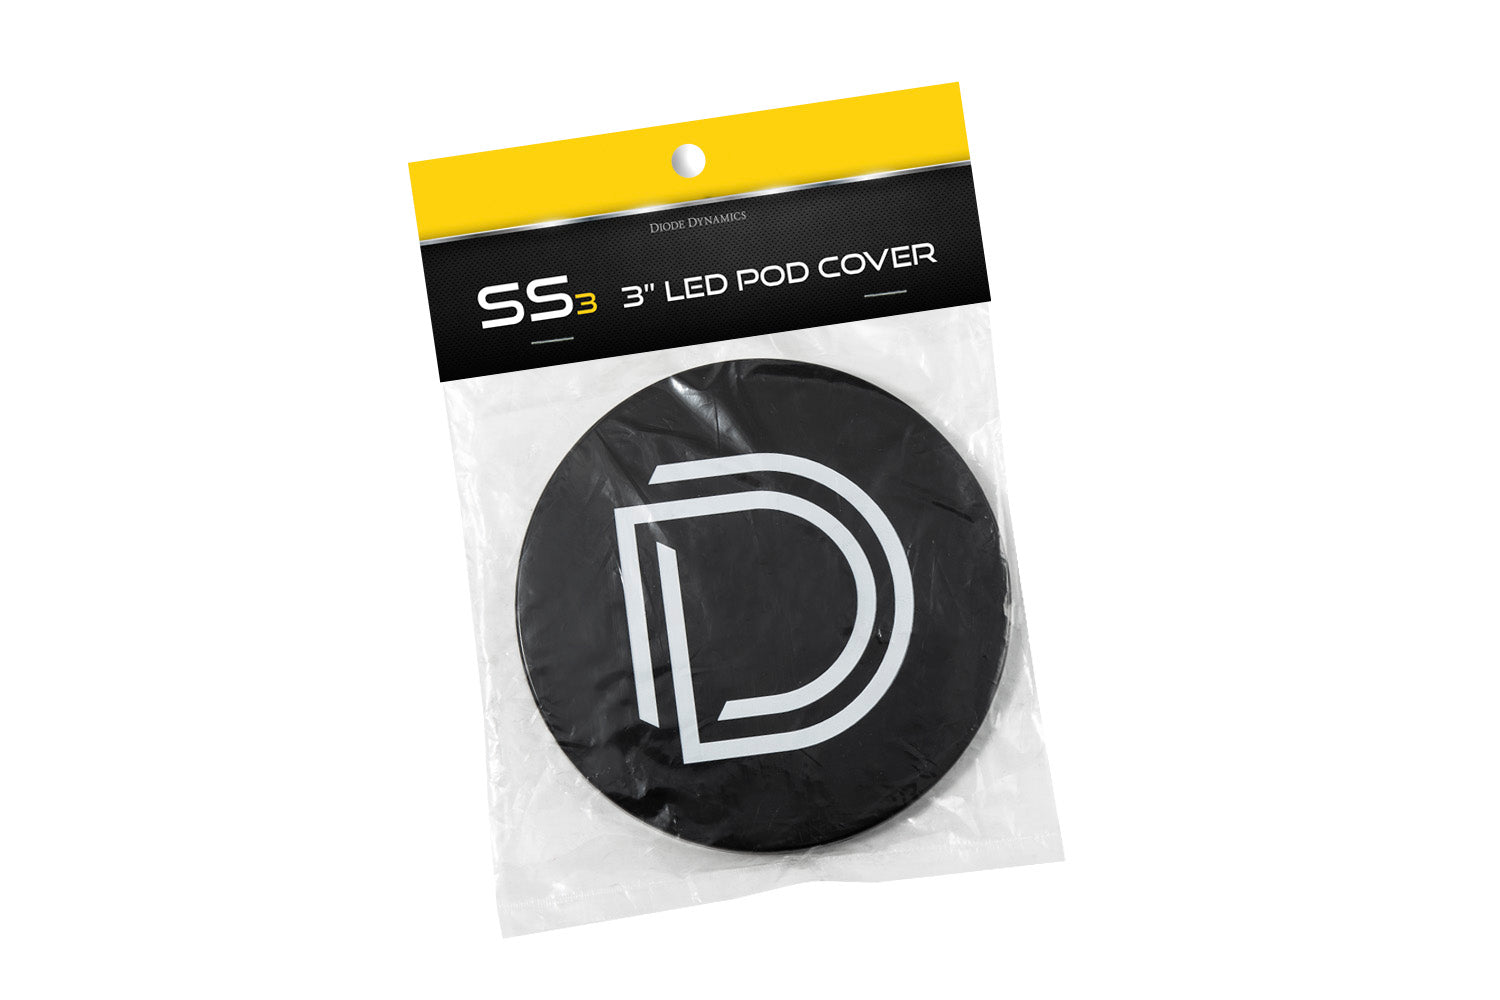 Worklight SS3 Cover Round Black Diode Dynamics